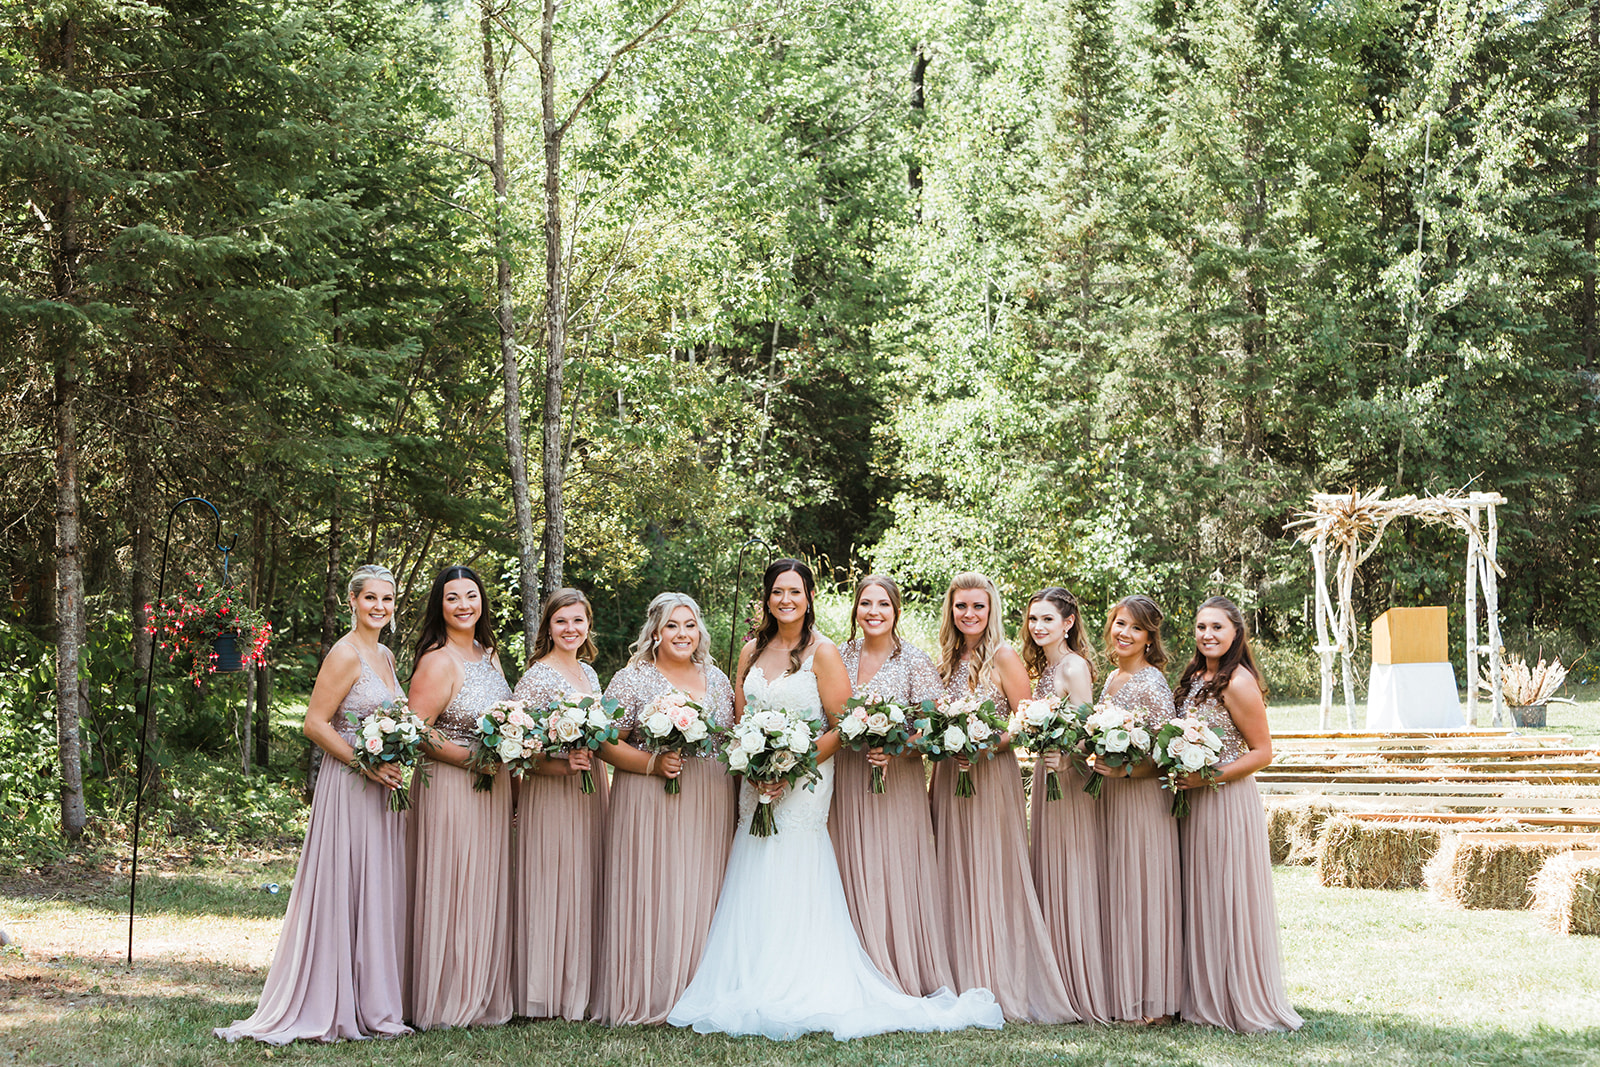 Bride and bridesmaids photos from a summer wedding in Minnesota